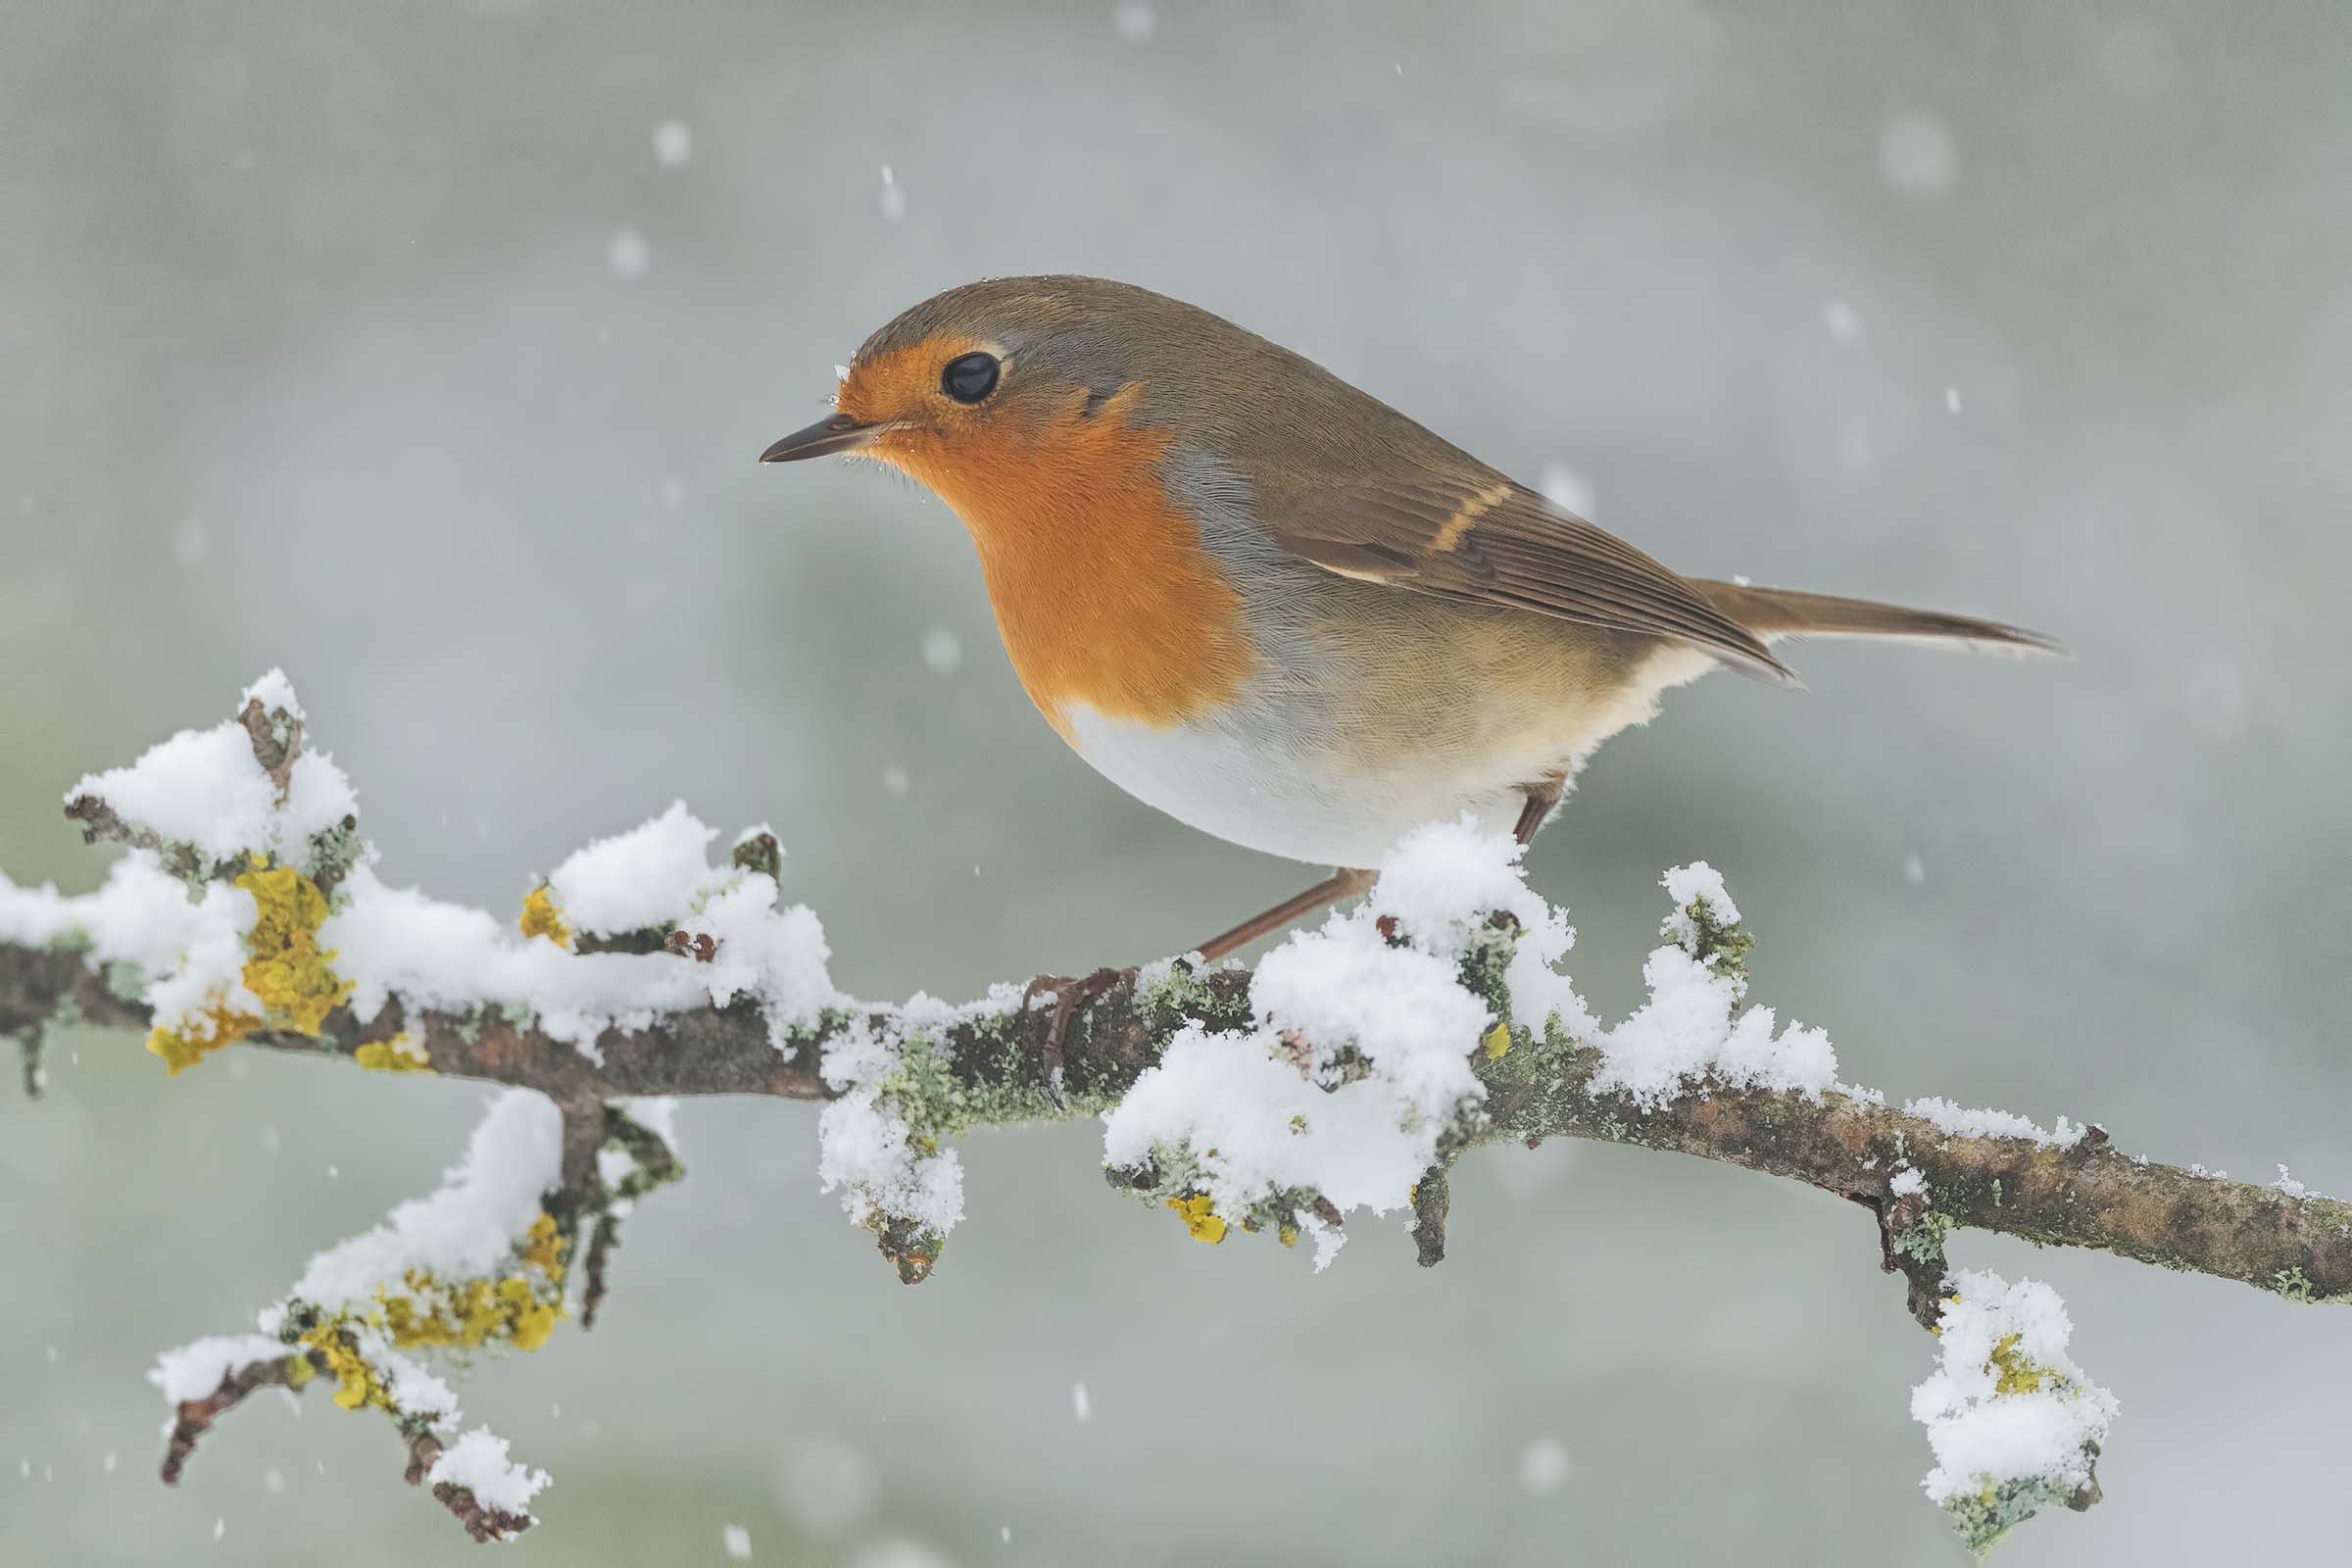 The Robin under the Snow...